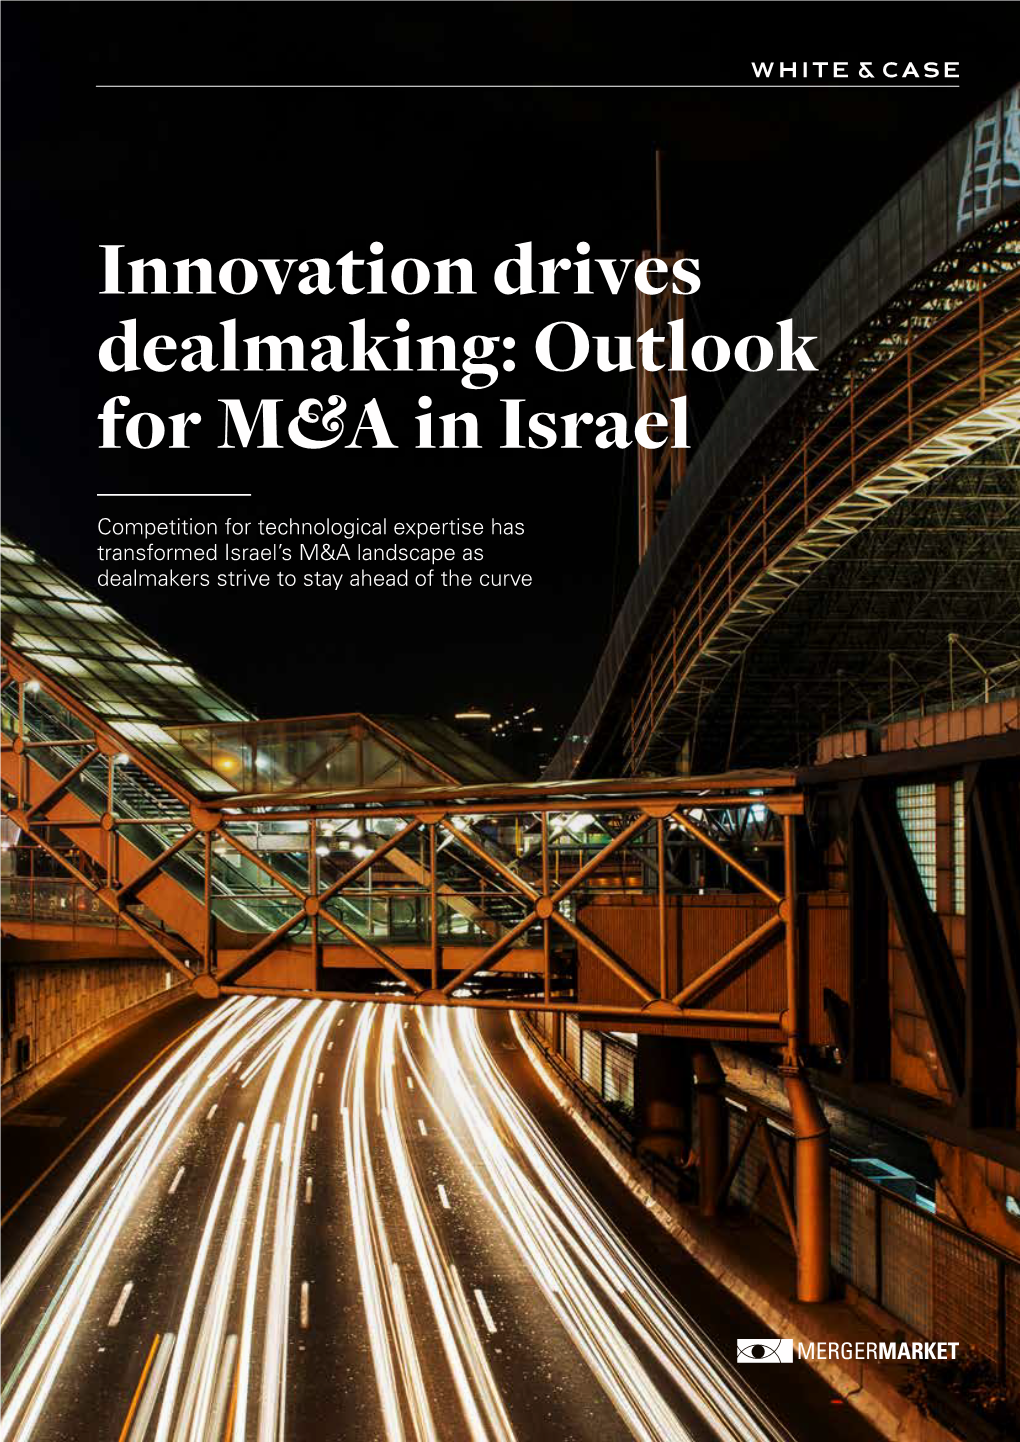 Innovation Drives Dealmaking: Outlook for M&A in Israel